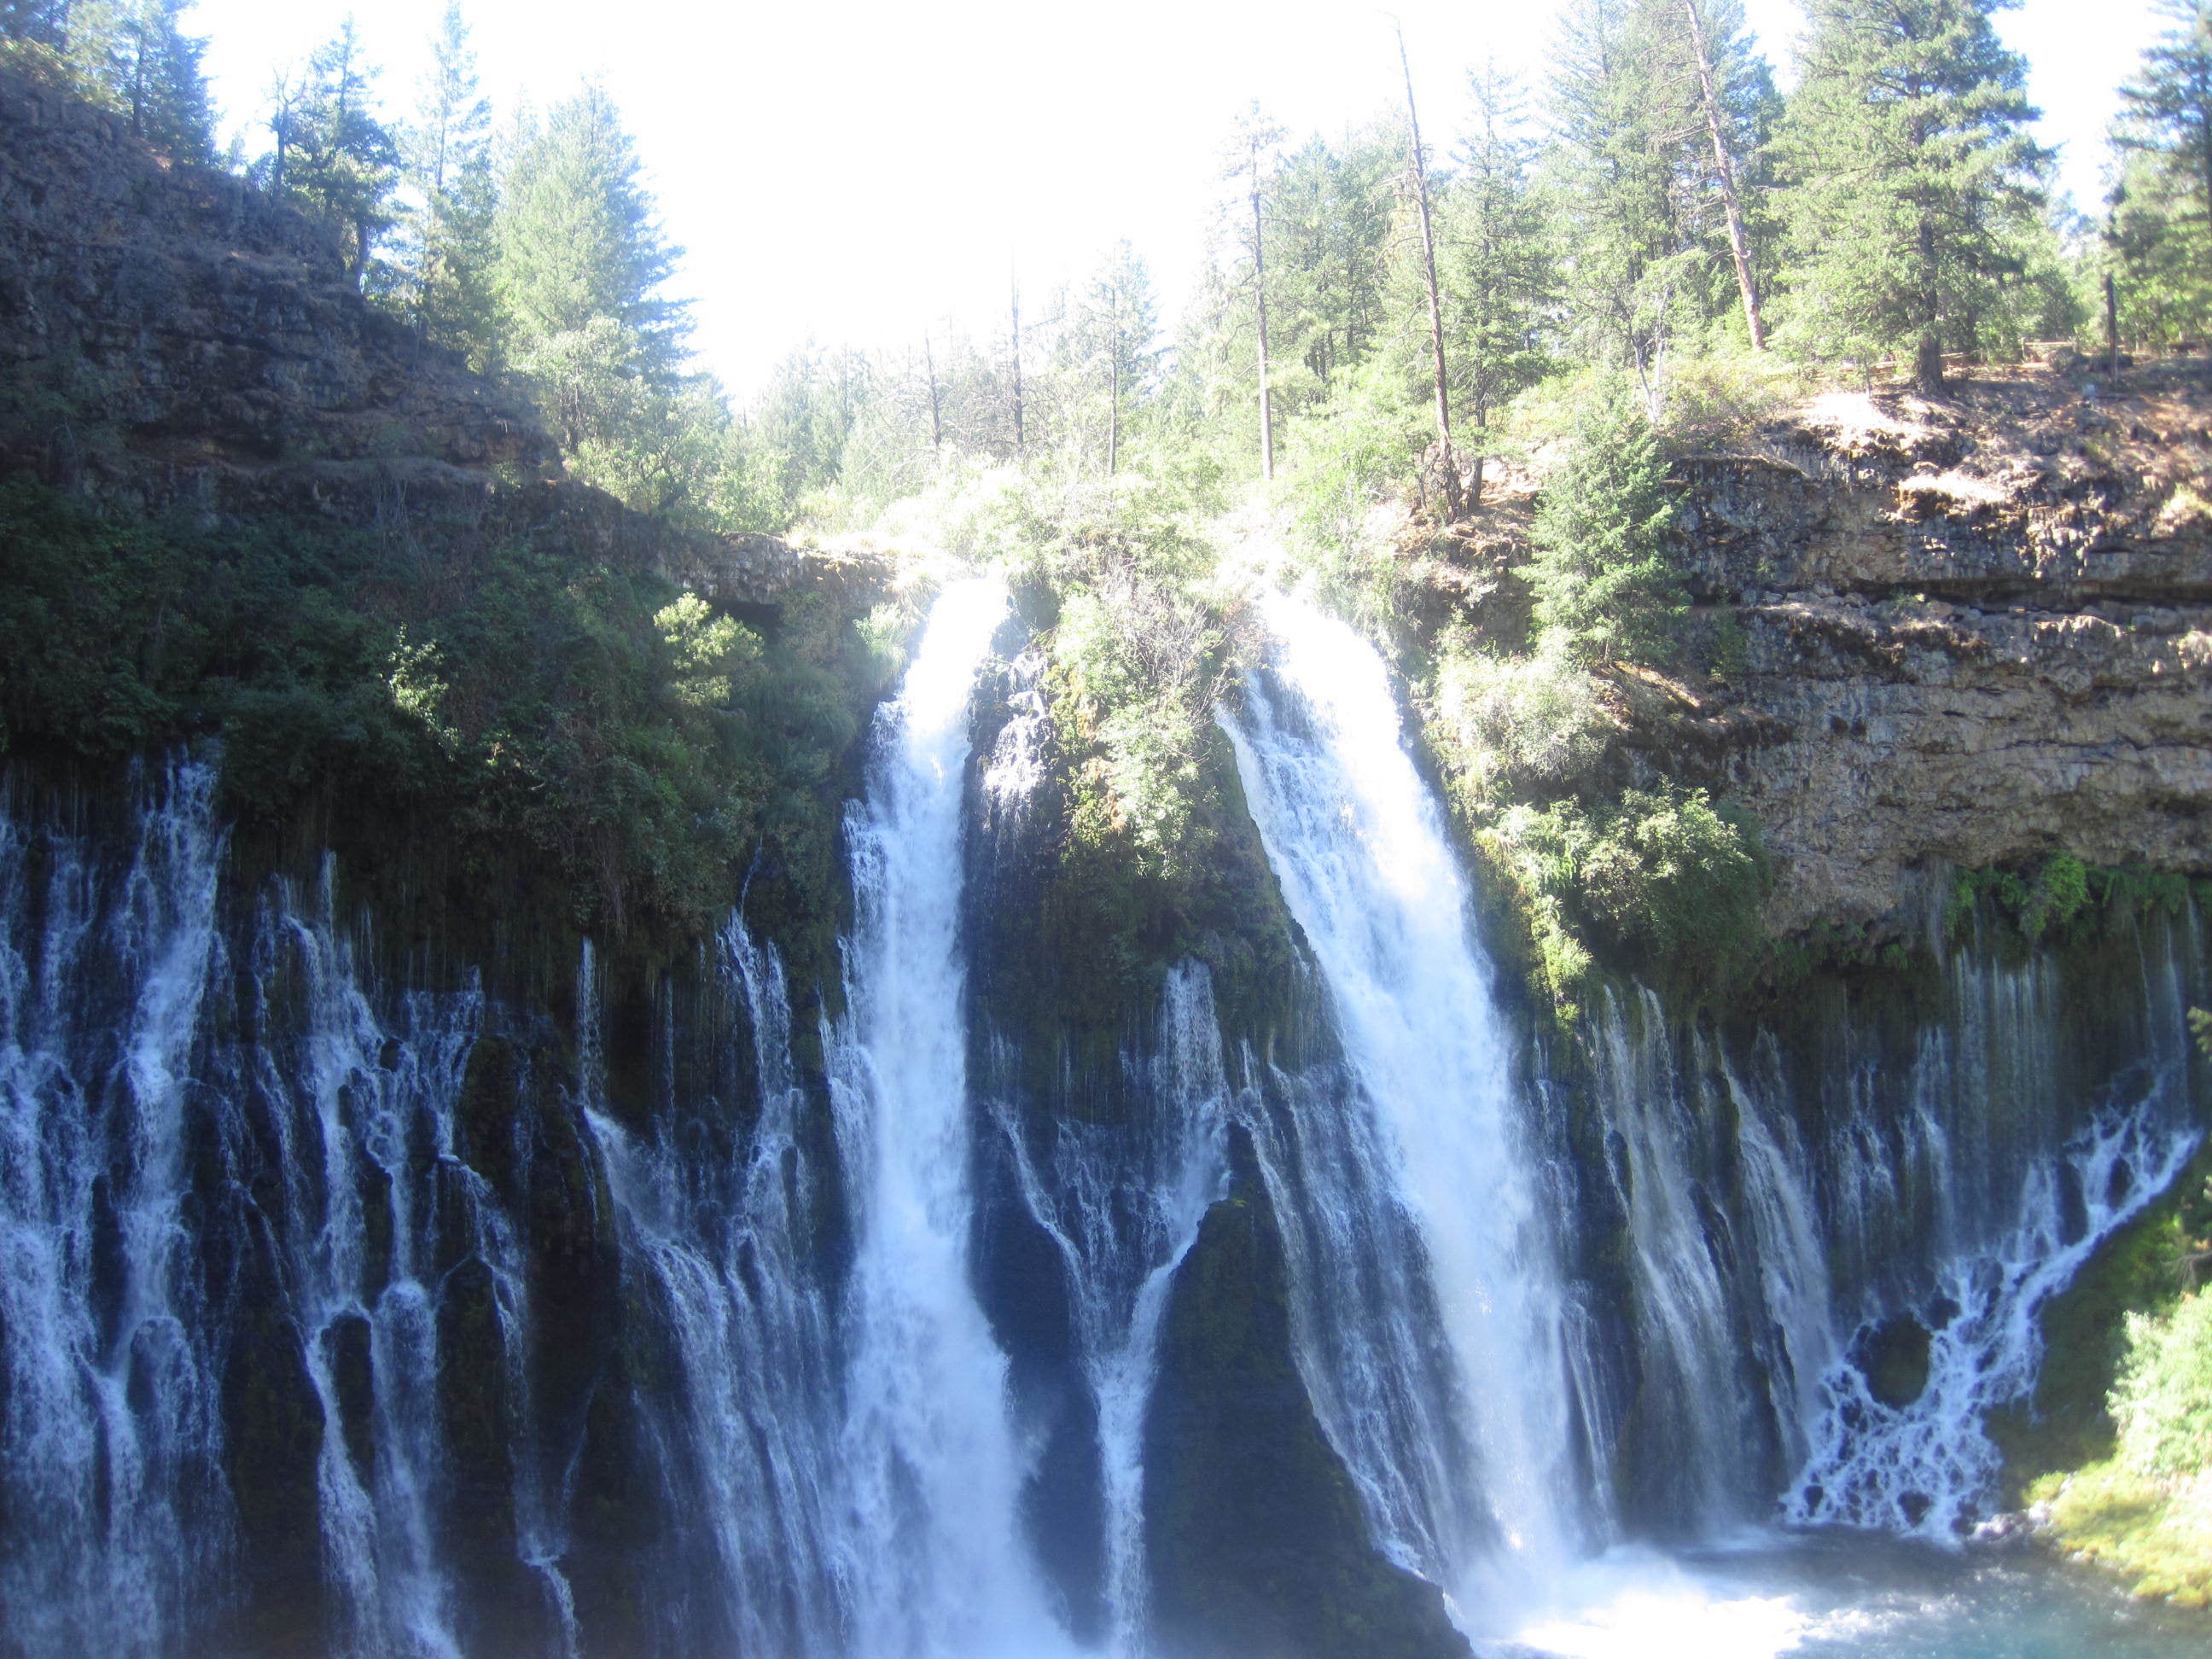 Camper submitted image from McArthur-Burney Falls Memorial State Park Campground - 3